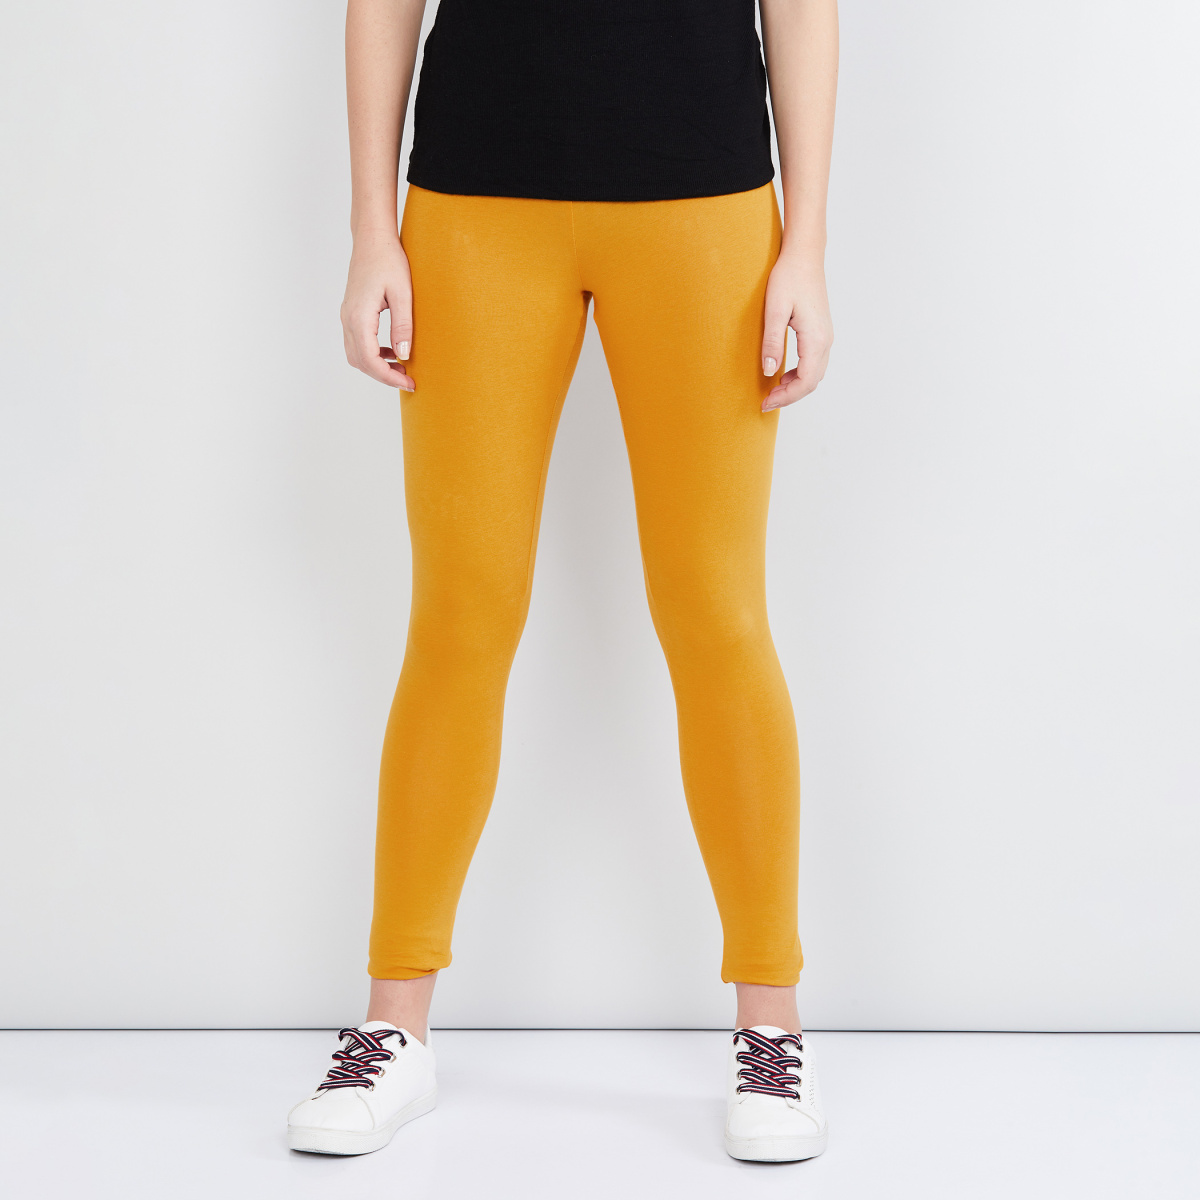 S Max Mara women's Pants FW23 Collection online at GIGLIO.COM